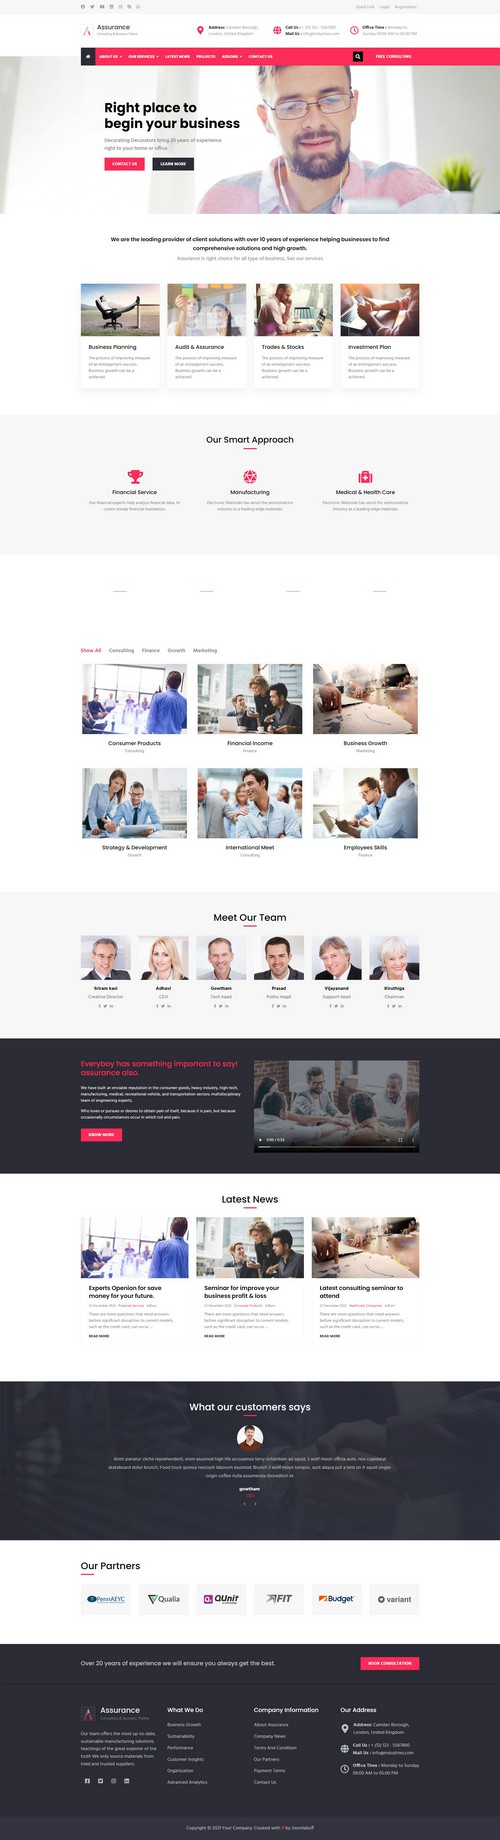 Assurance - Consulting Business Joomla Template